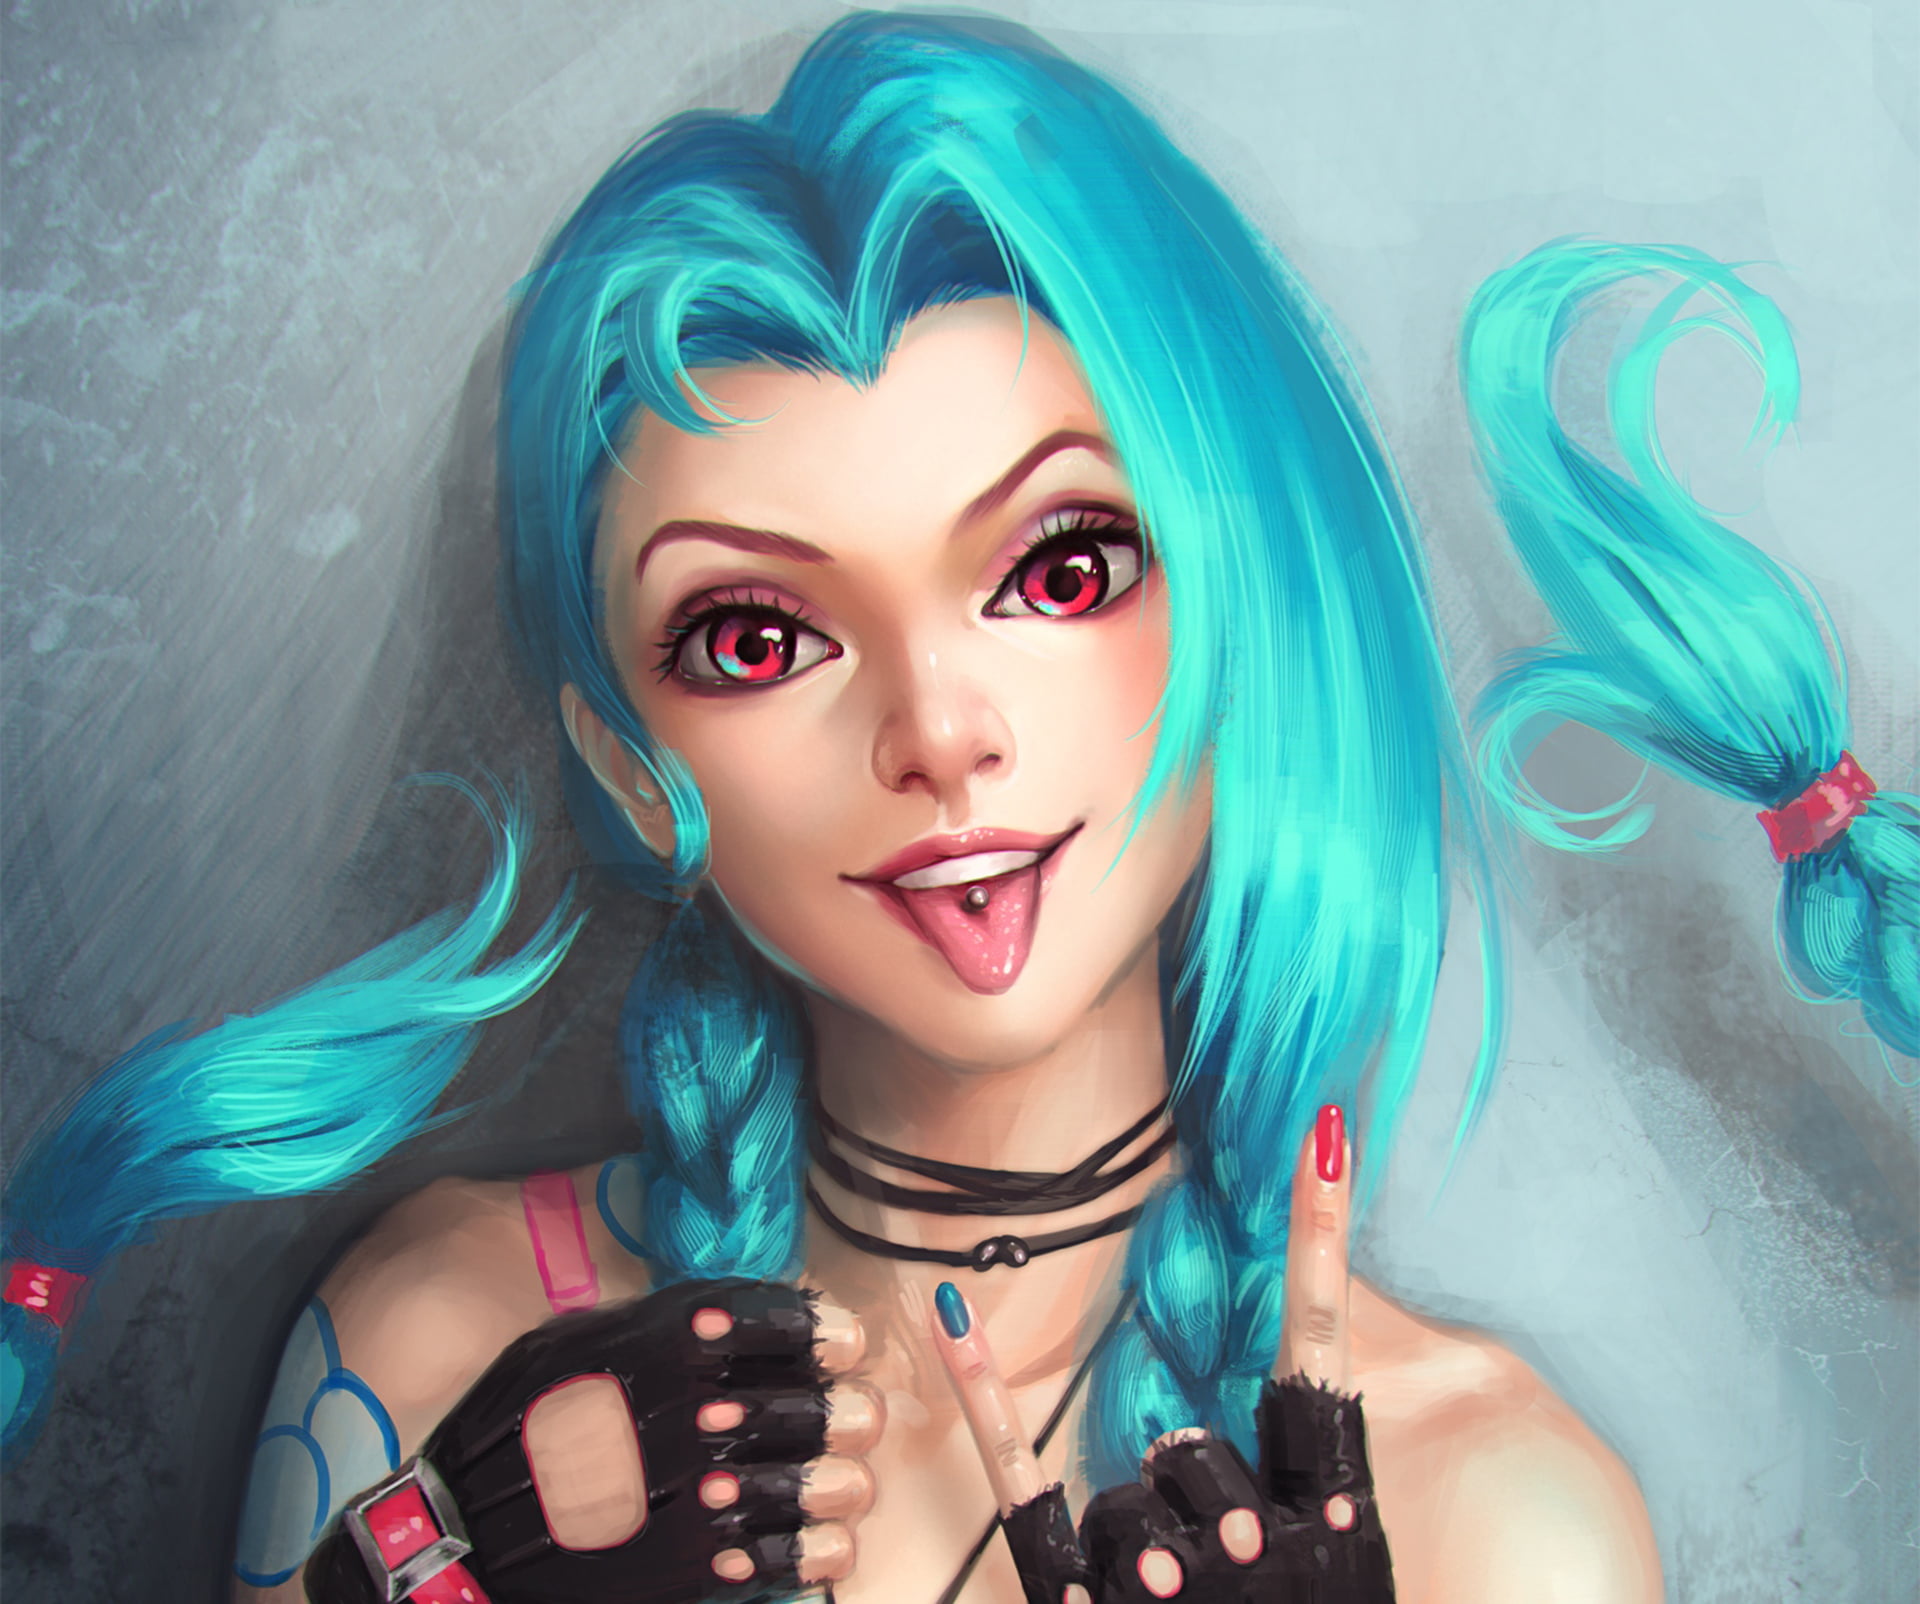 teal haired girl anime character, jinx, league of legends, art